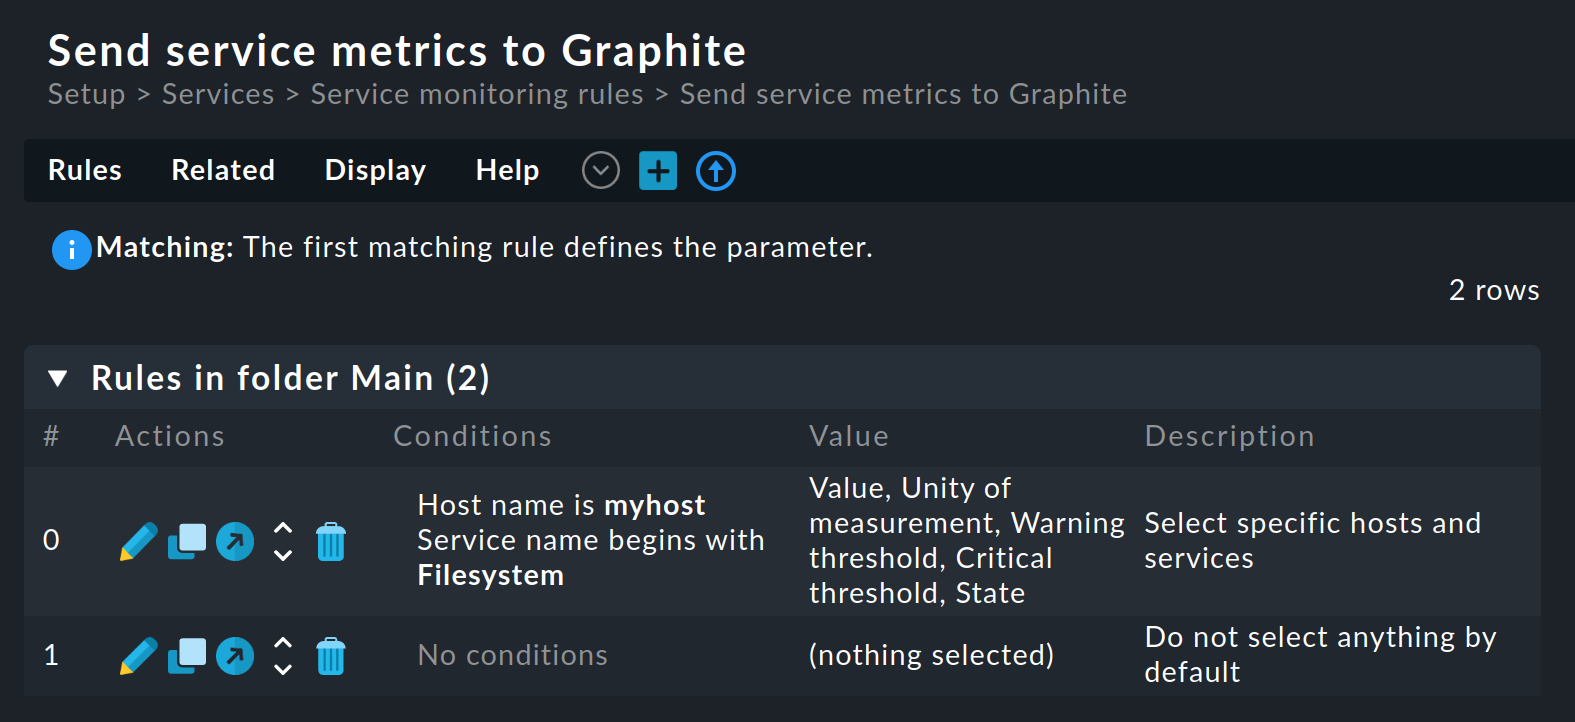 List of rules for sending over the Graphite connection.